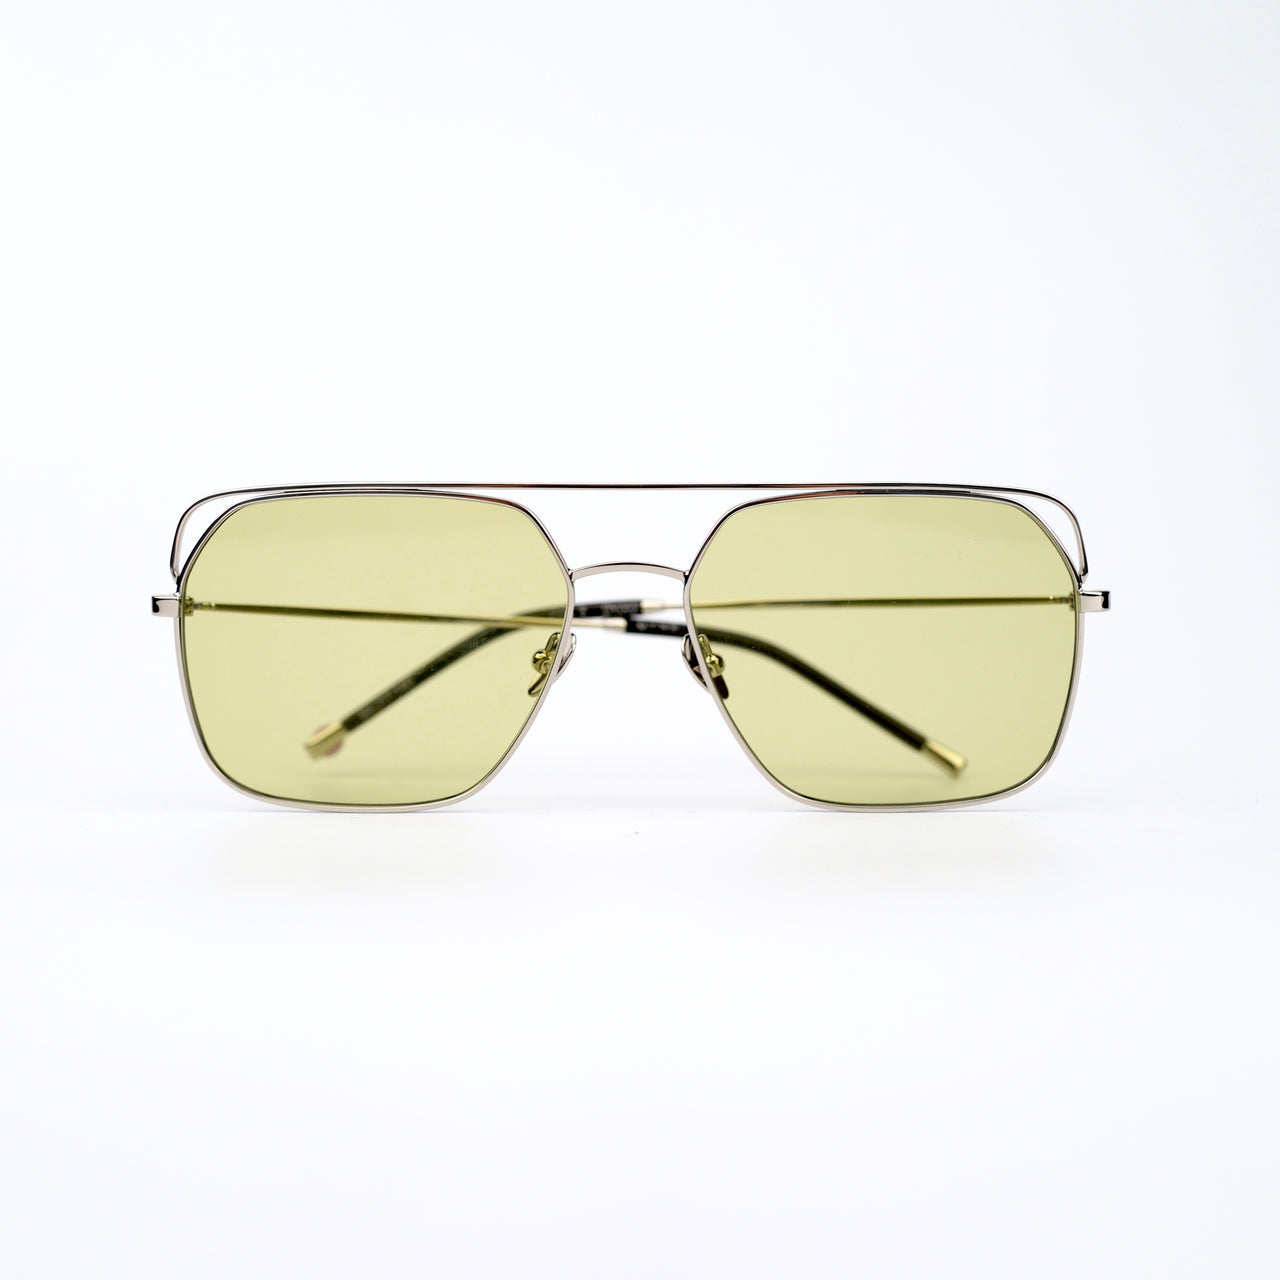 Square Silver-tone Metal Frame Sunglasses with Olive Green Lenses